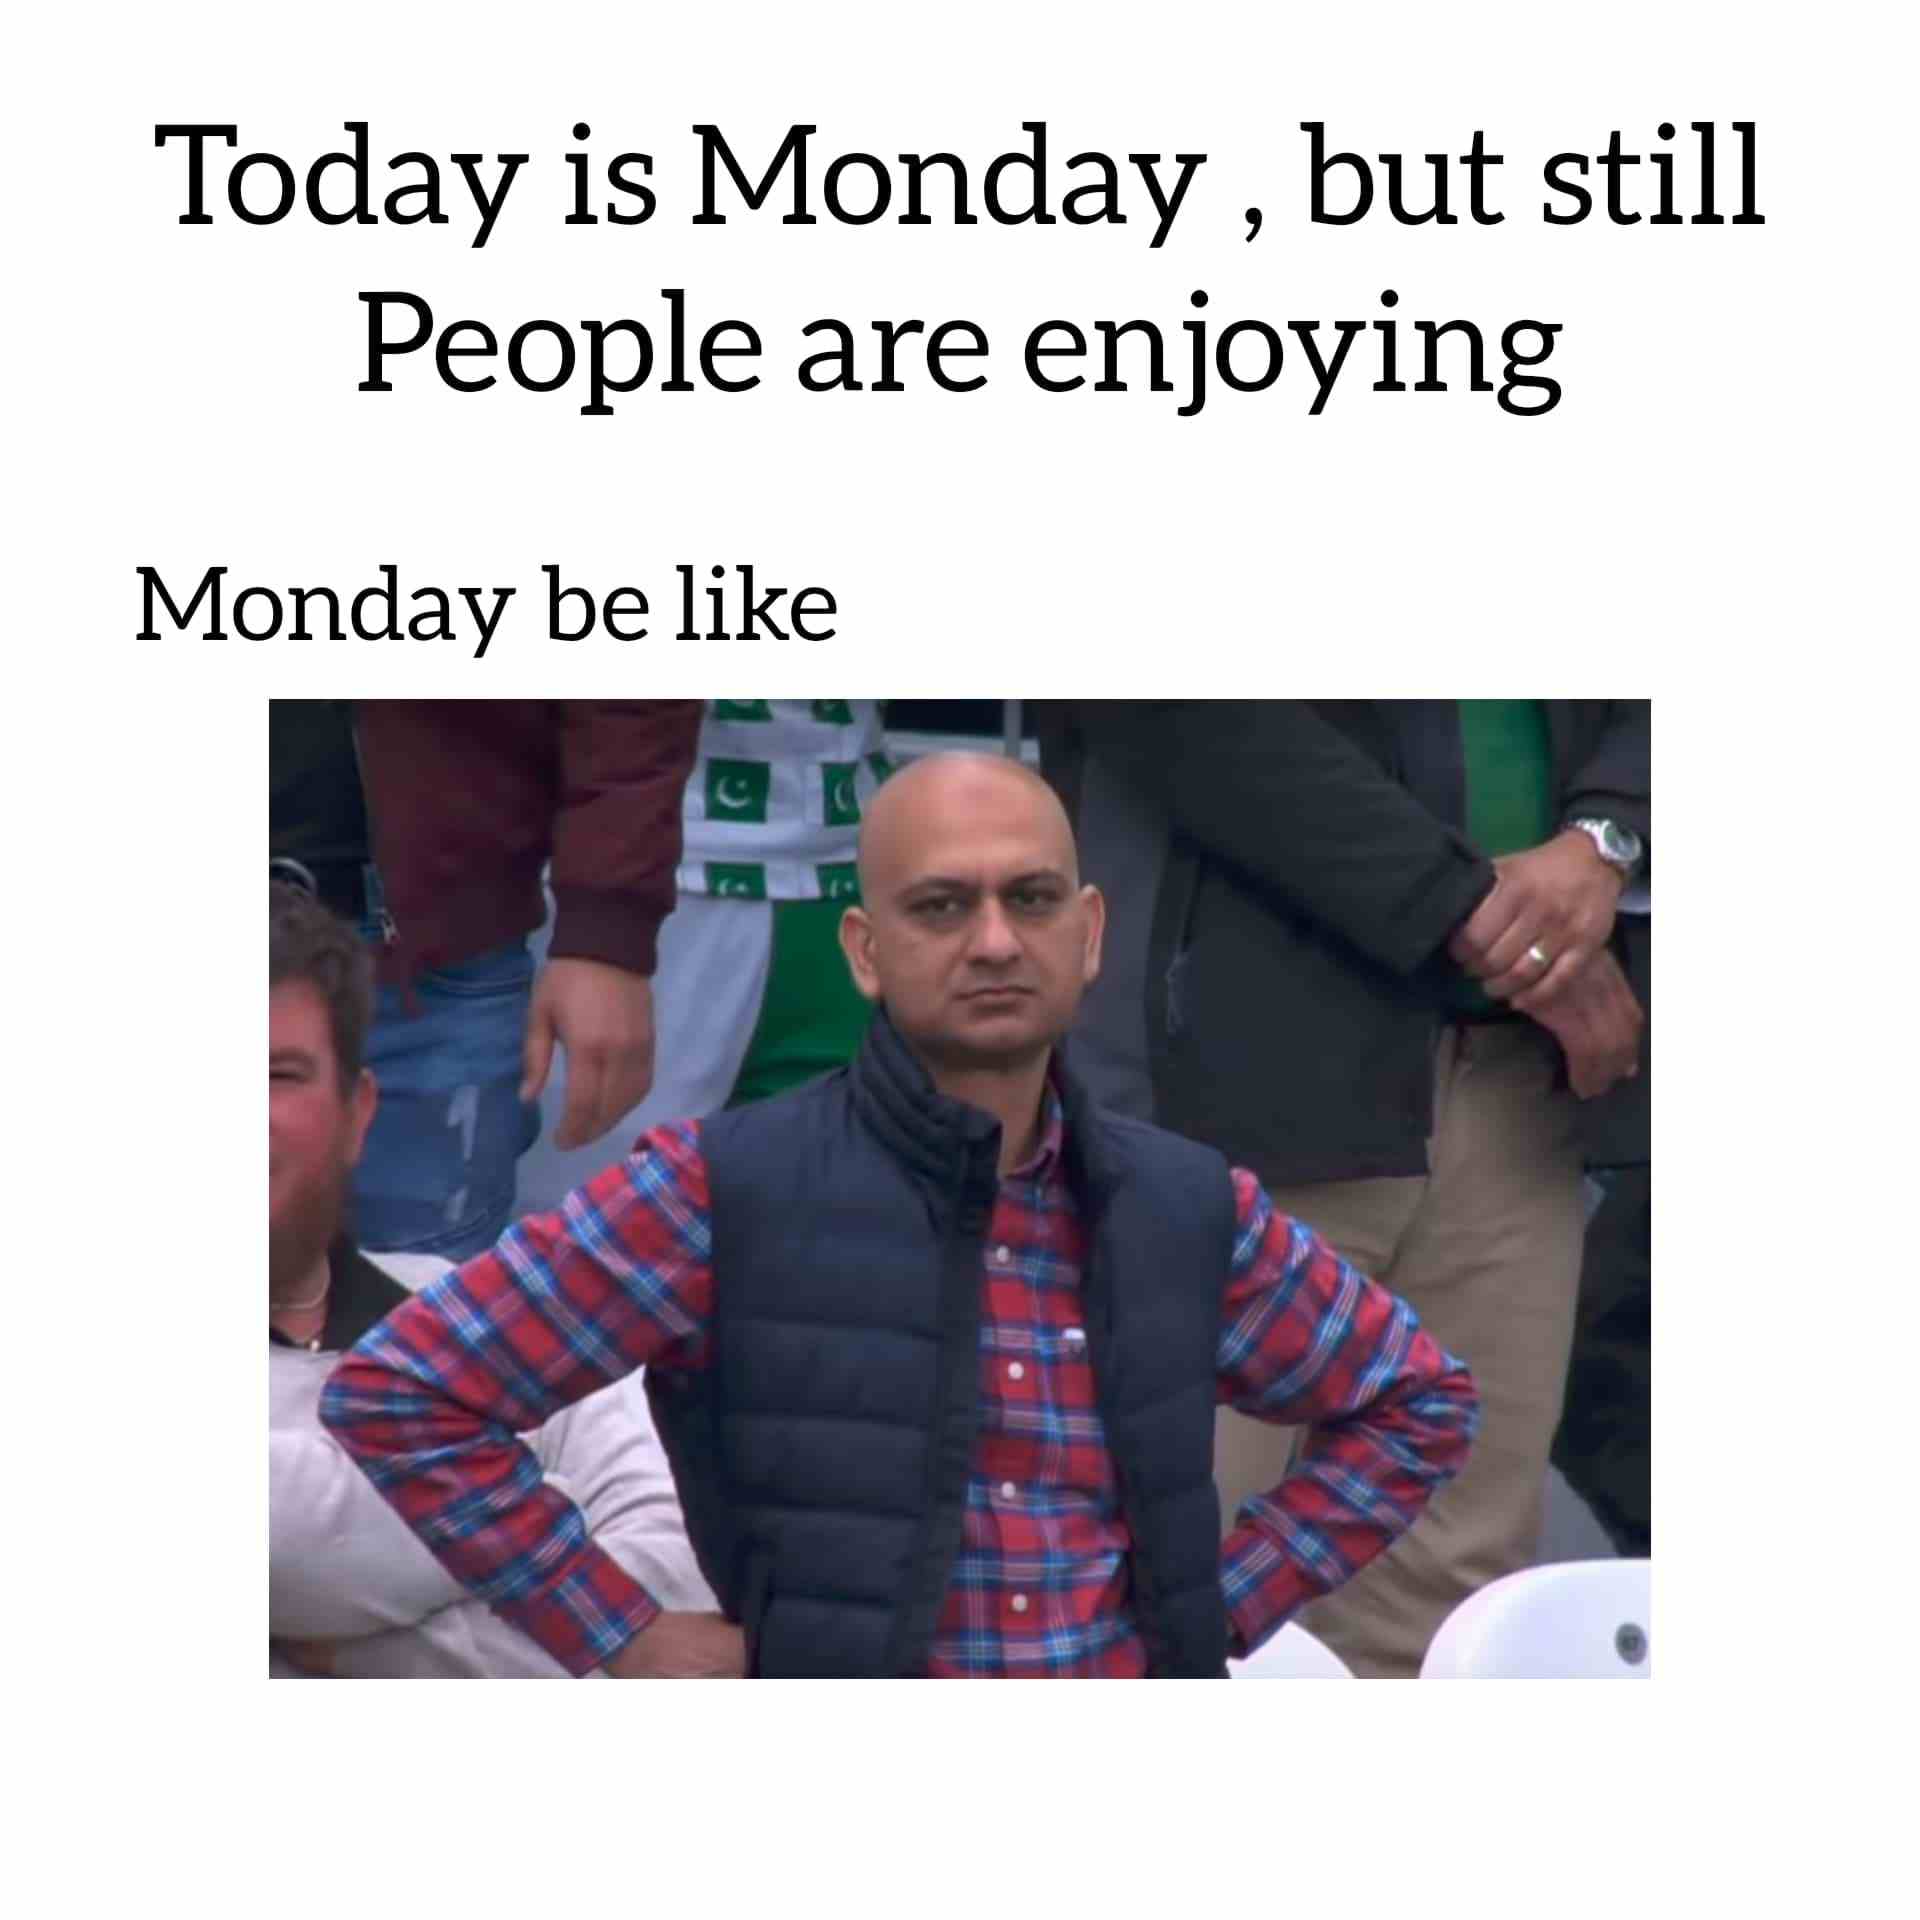 Today is Monday, but still people are enjoying